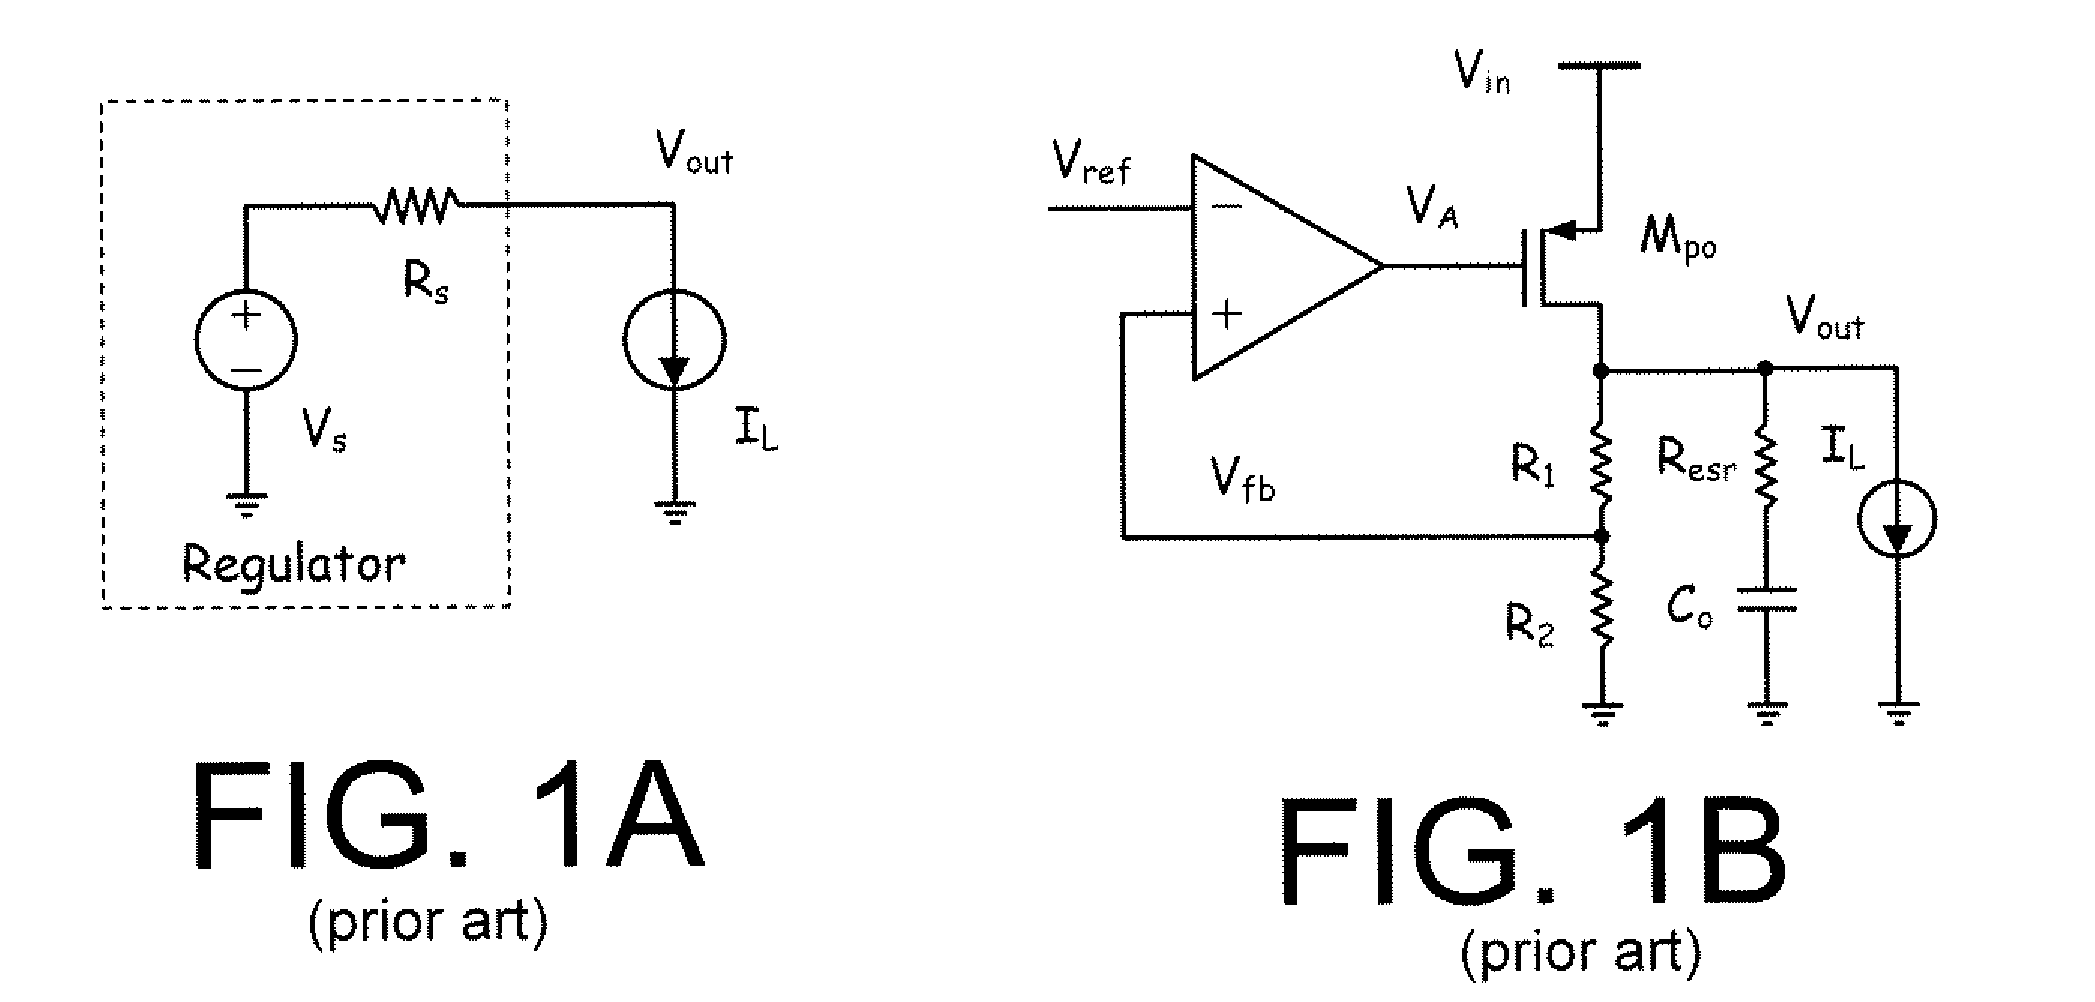 Systems, methods, and apparatuses for implementing a load regulation tuner for linear regulation